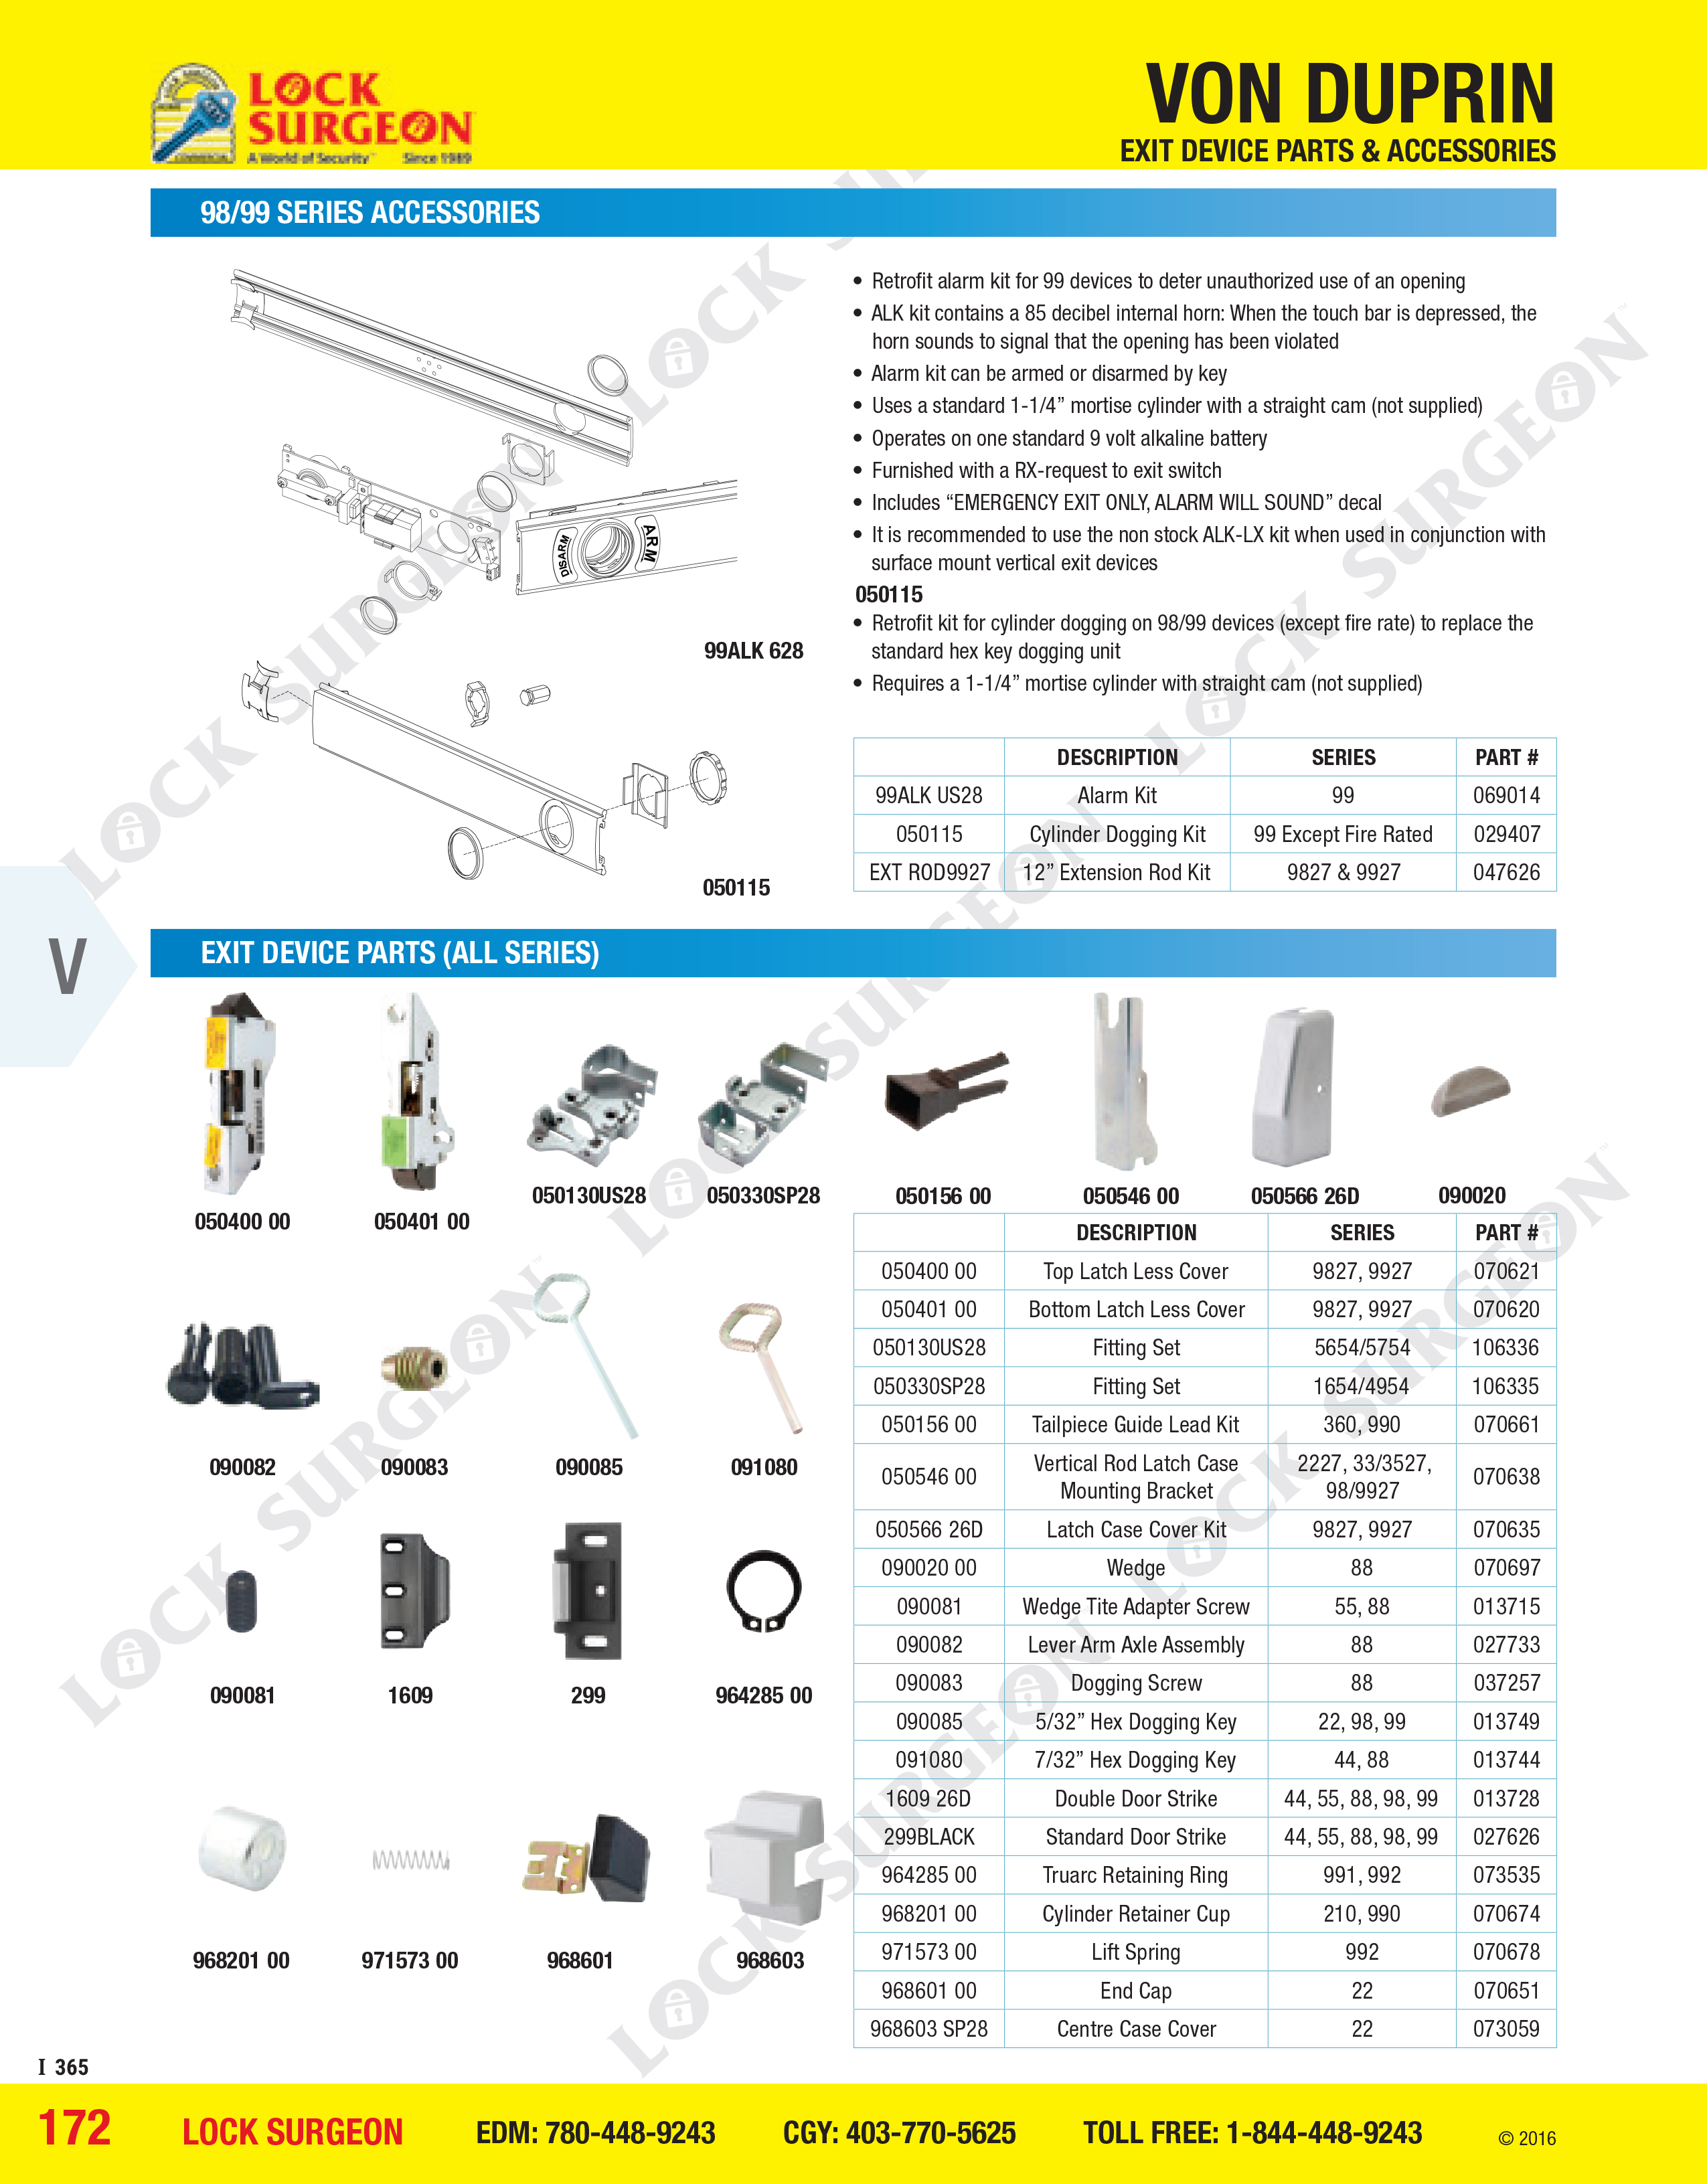 Von Duprin Panic Bar Exit Device Parts and Accessories